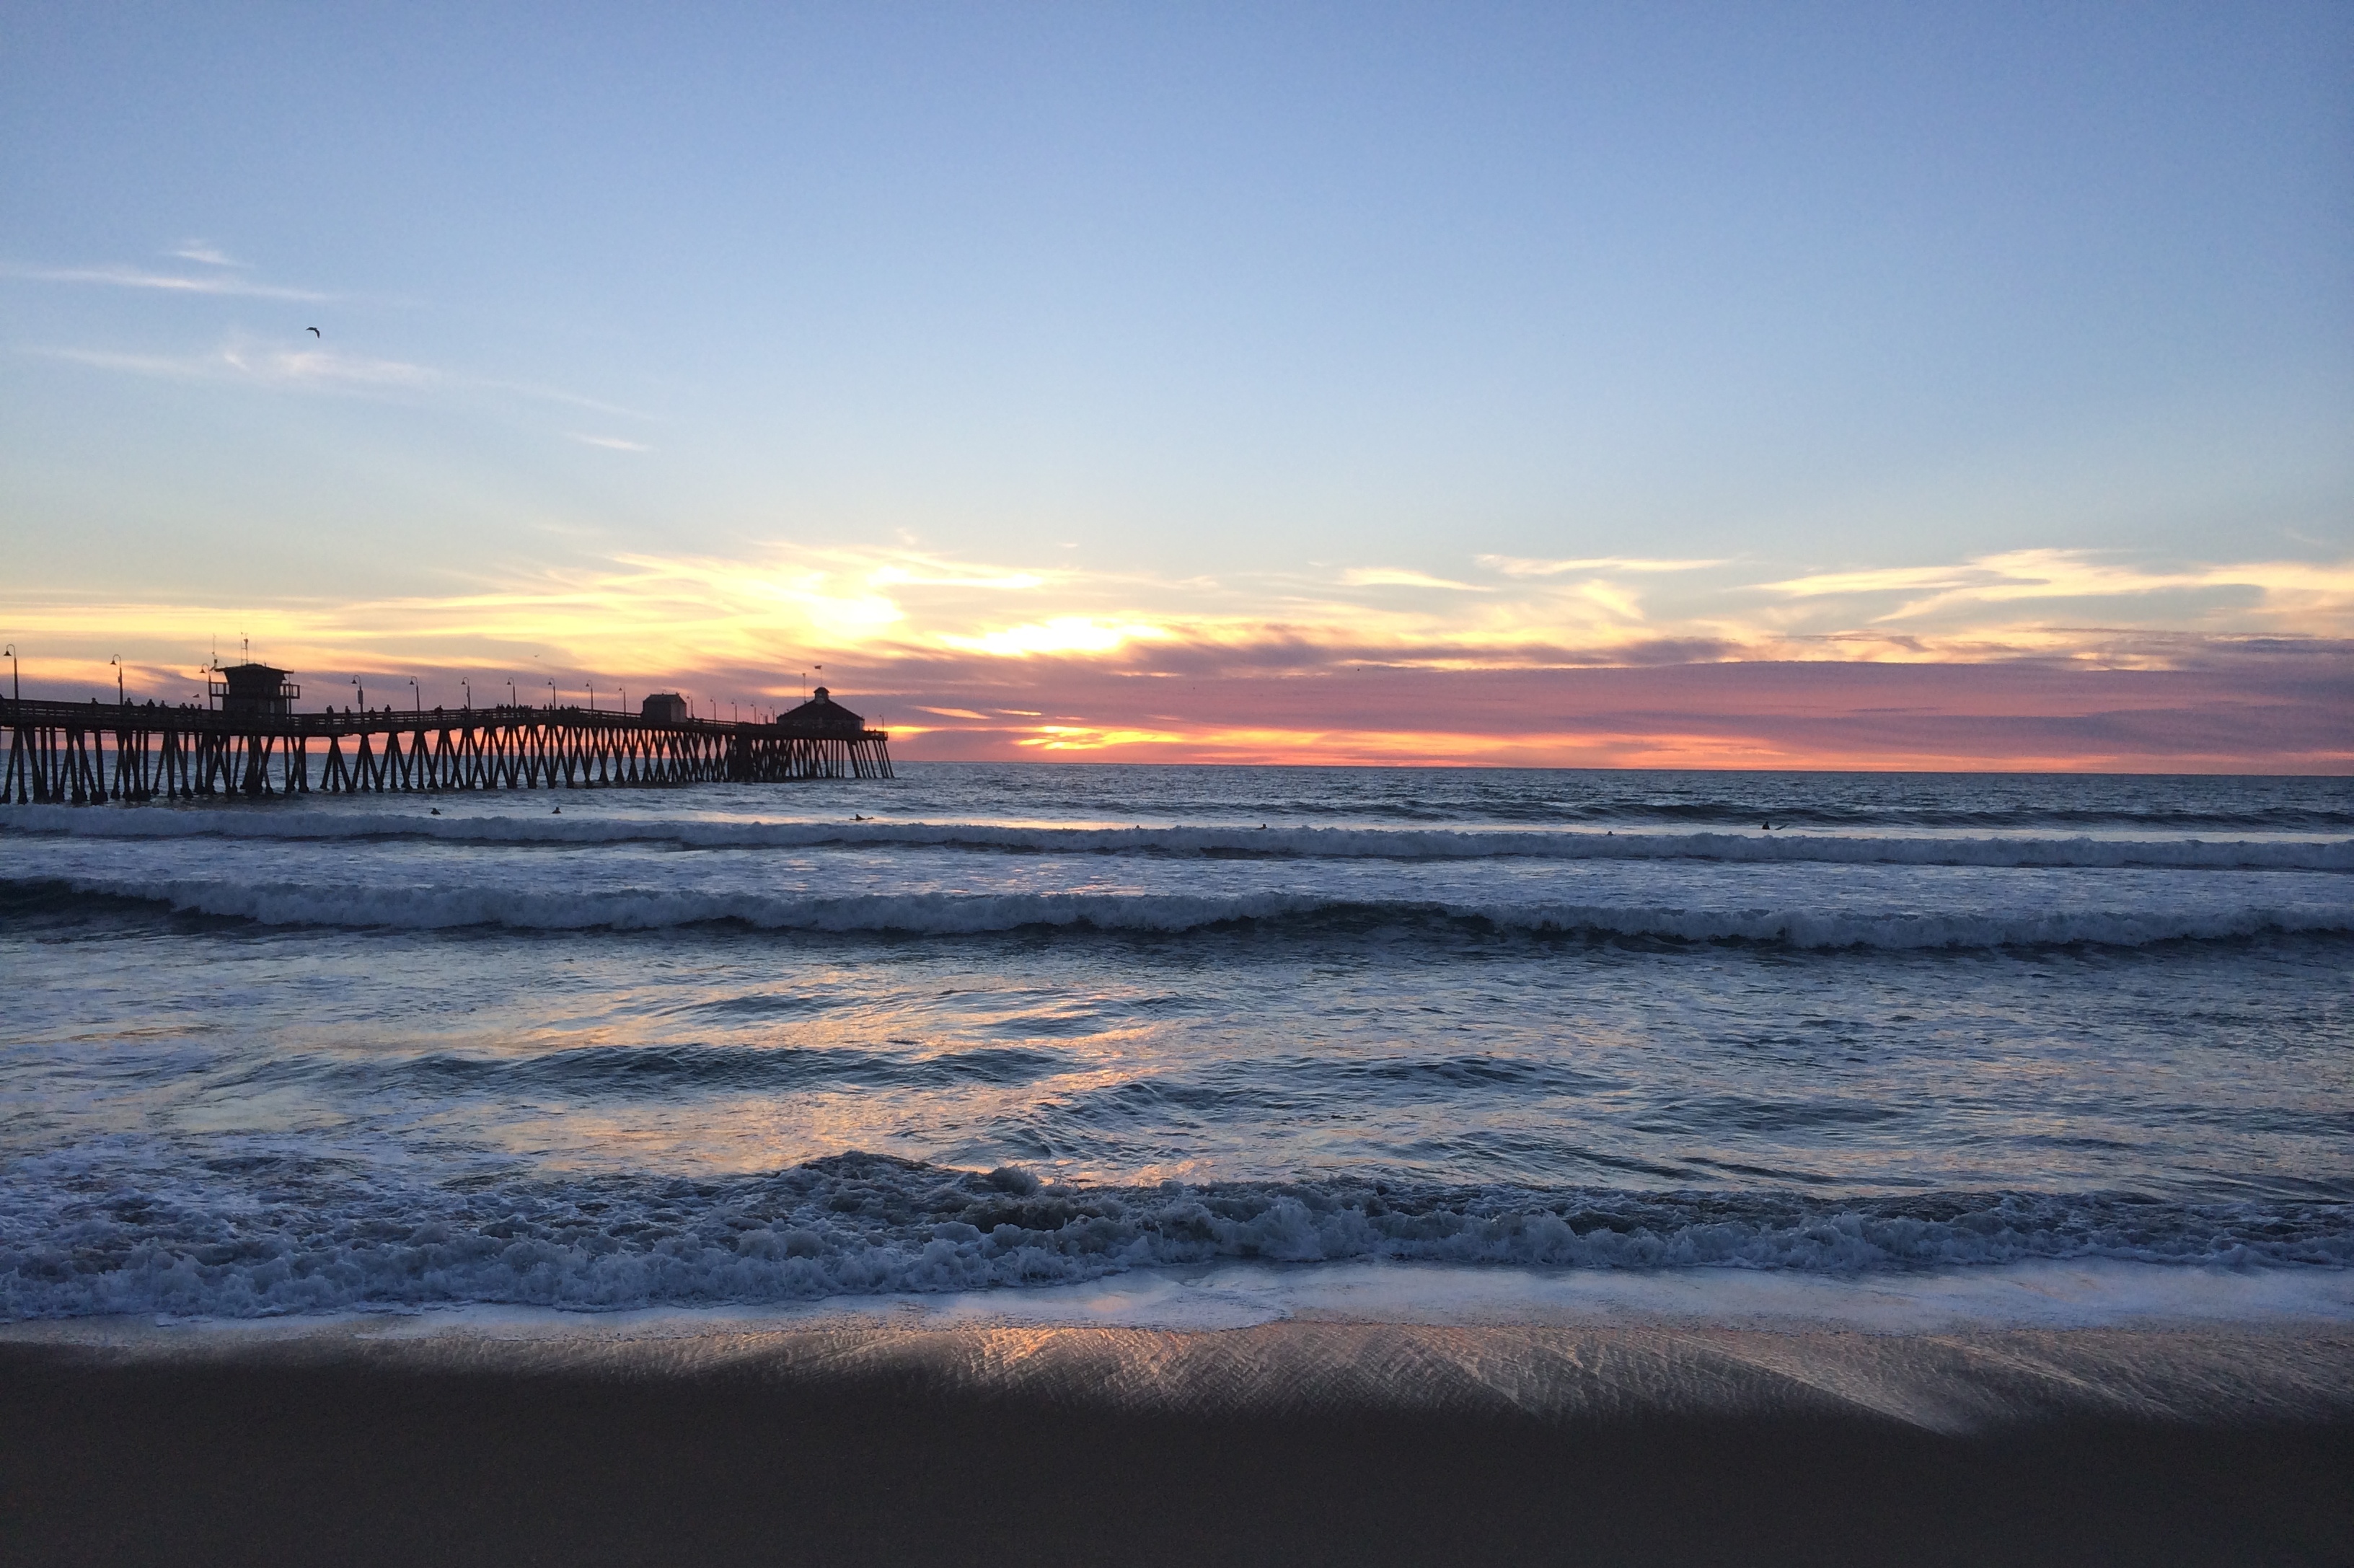 The beautiful sunset Hannah & Dave saw at Imperial Beach last night